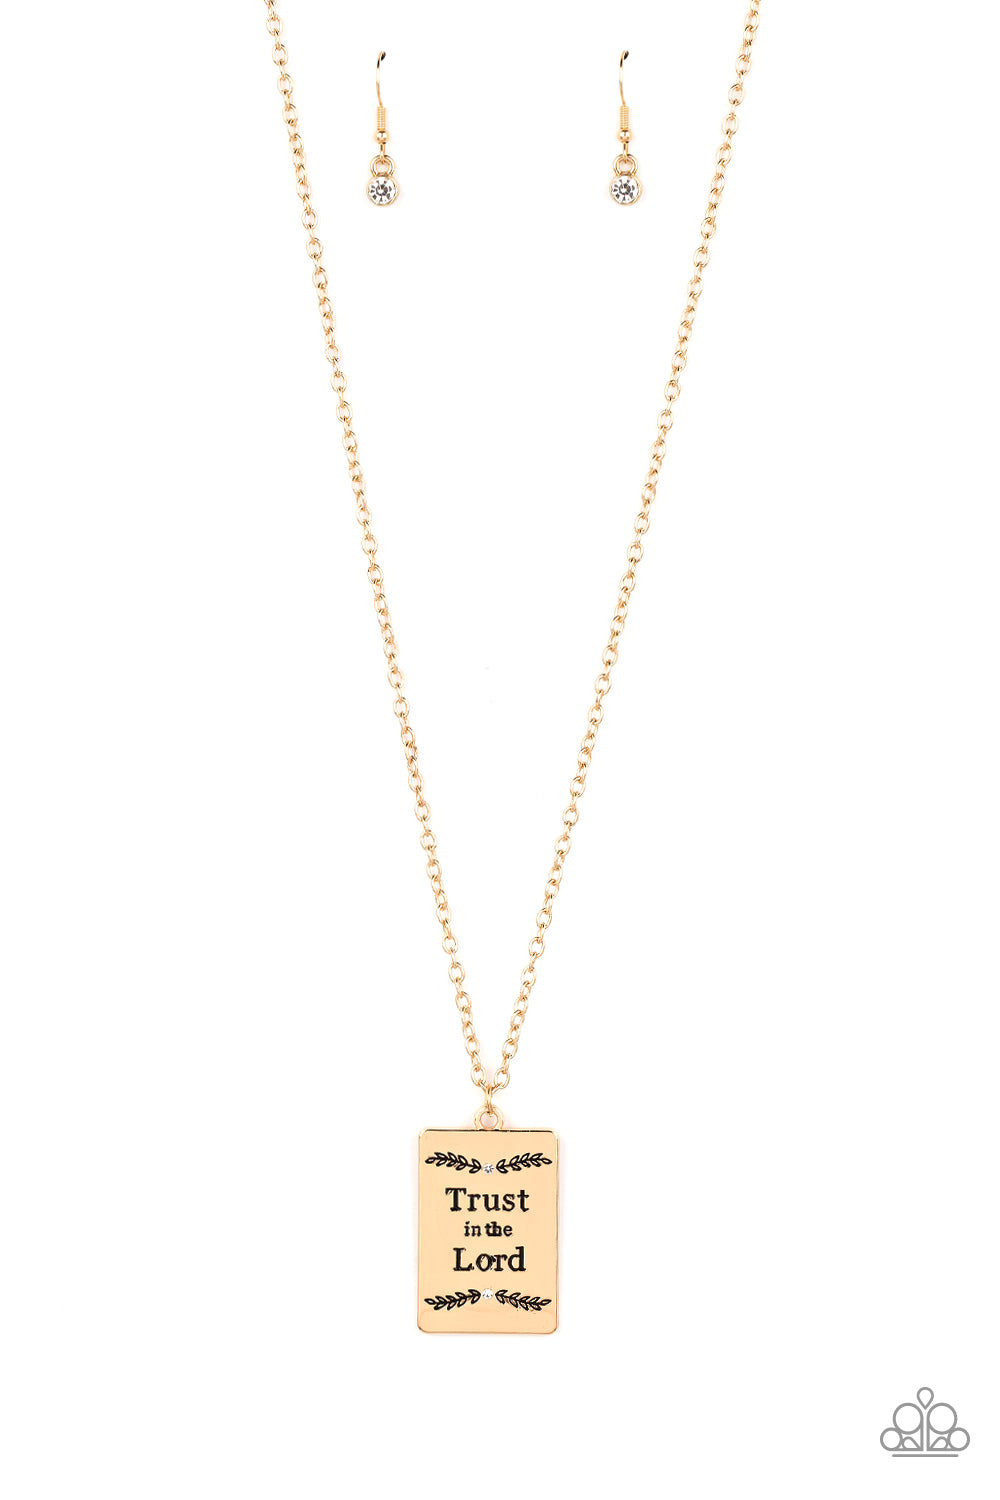 All About Trust - gold - Paparazzi necklace